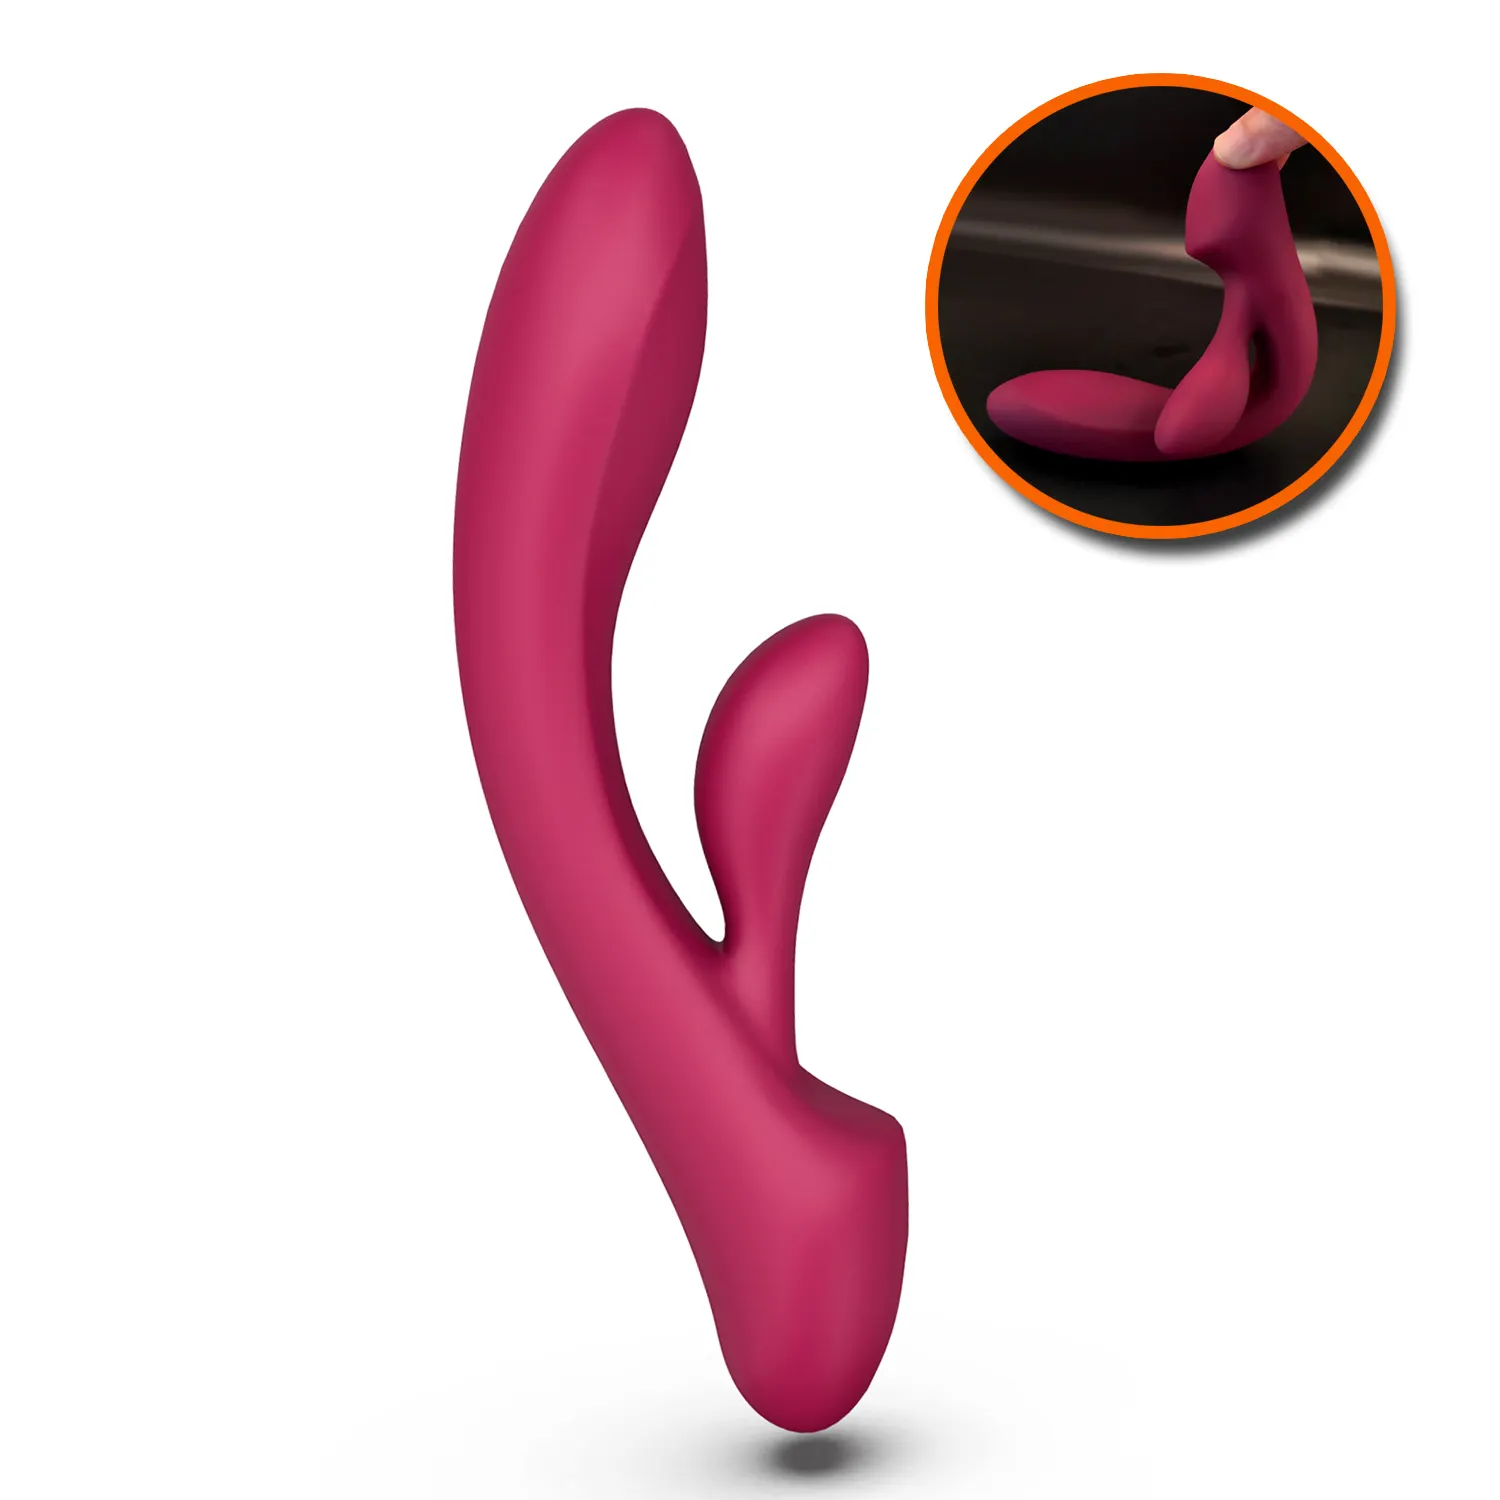 SAMEYO Adult Product Full Silicone Vibrating Cock Ring Waterproof Rechargeable Penis Ring Vibrator for Couples